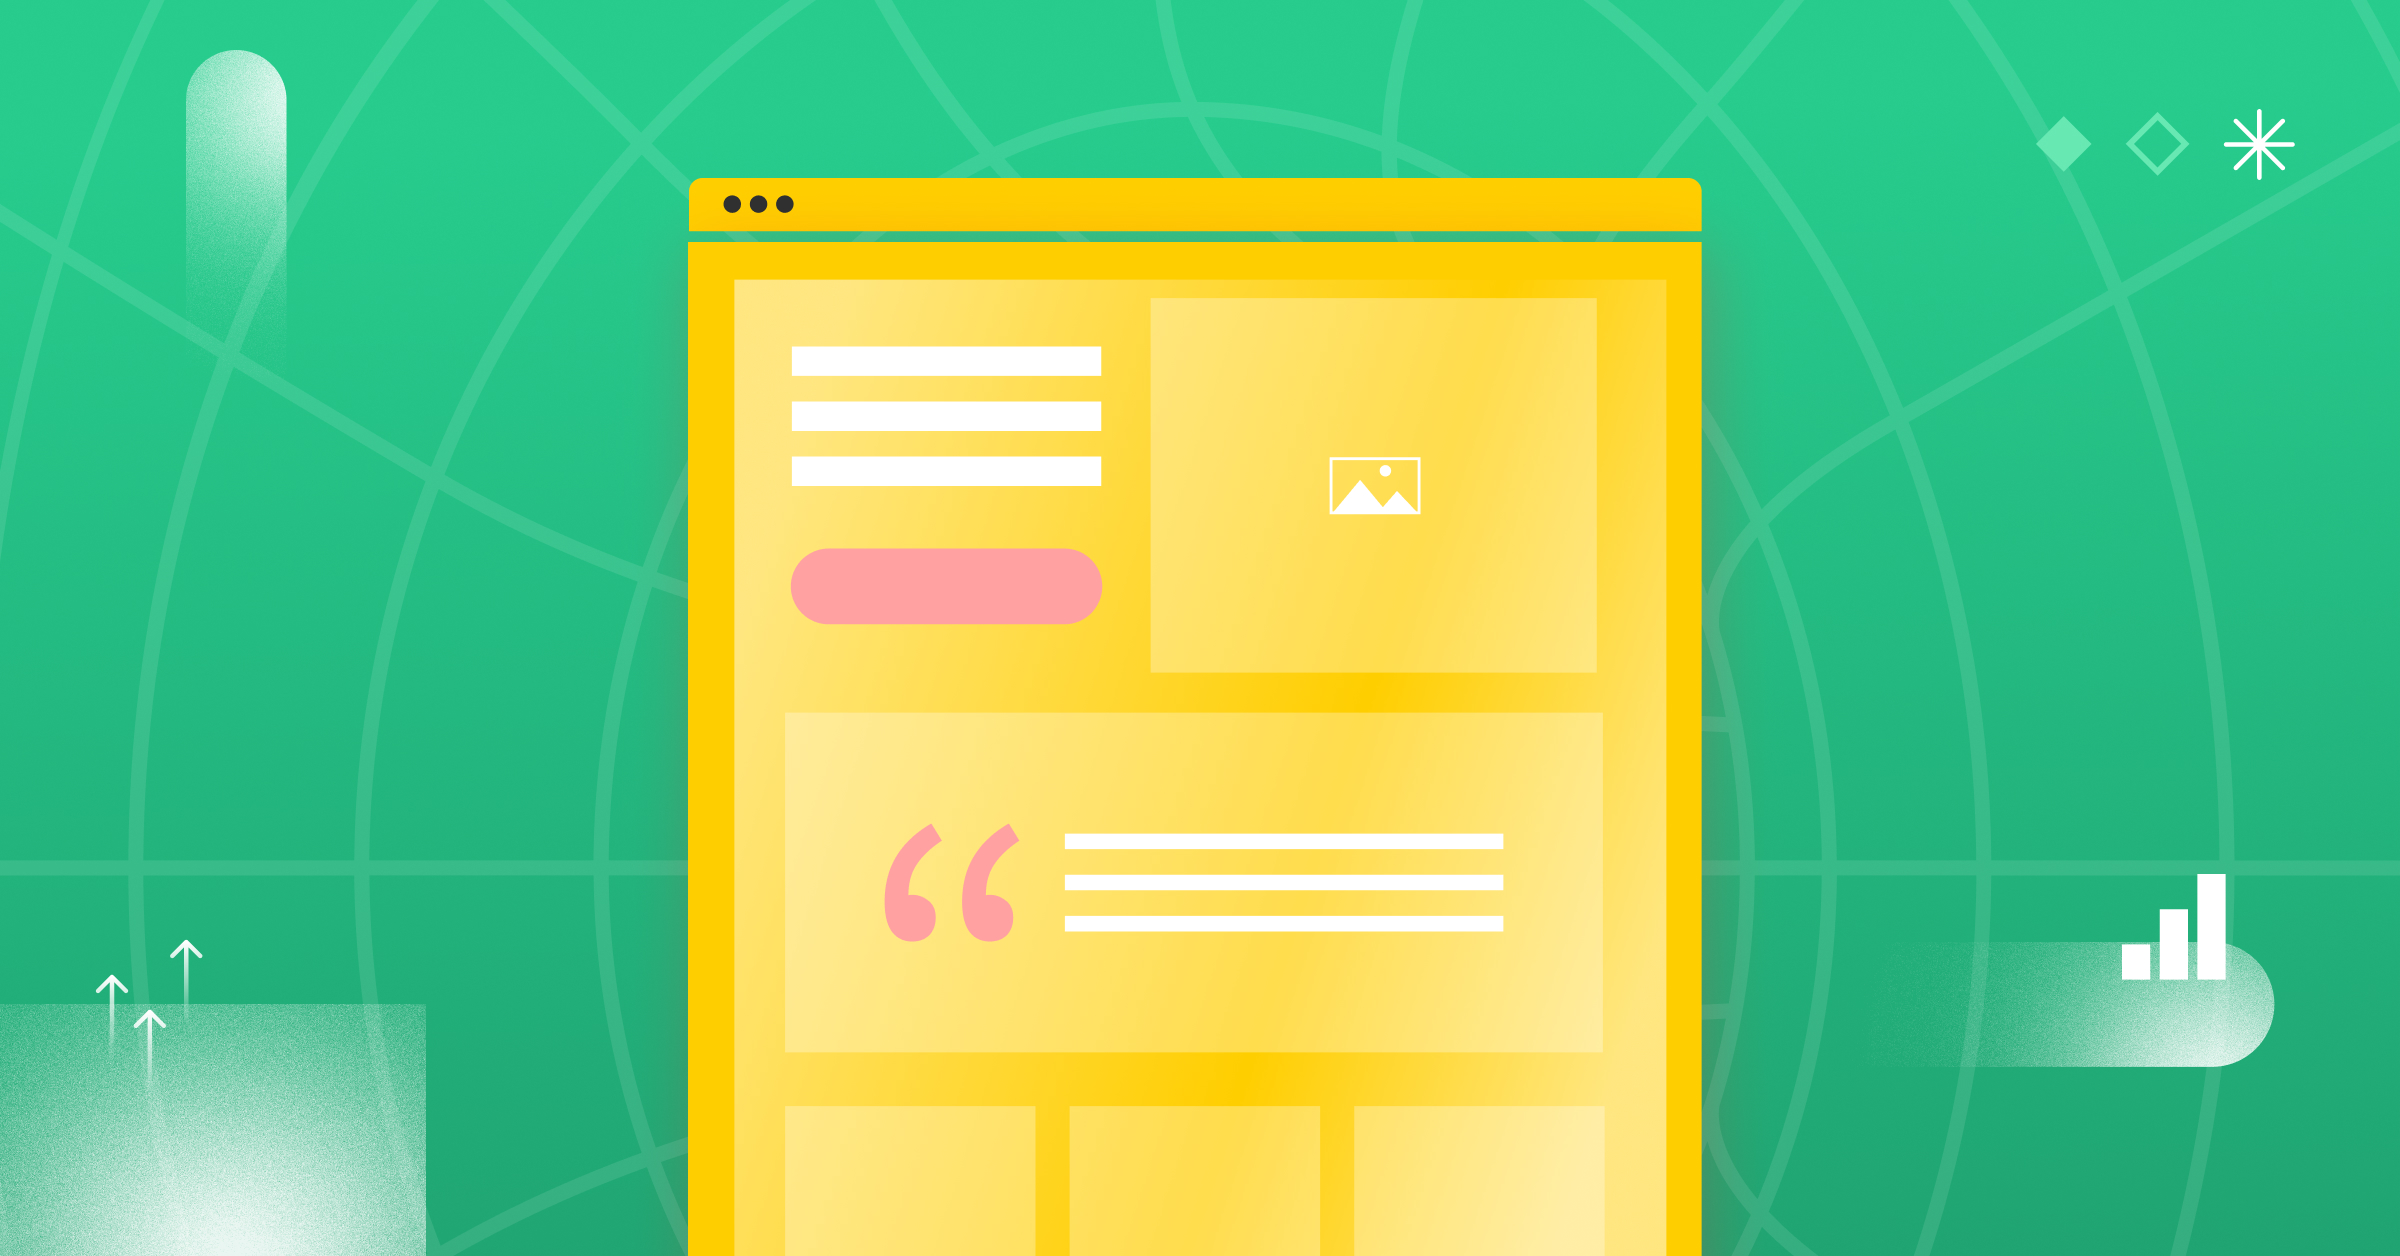 A stylized graphic of a generic landing page